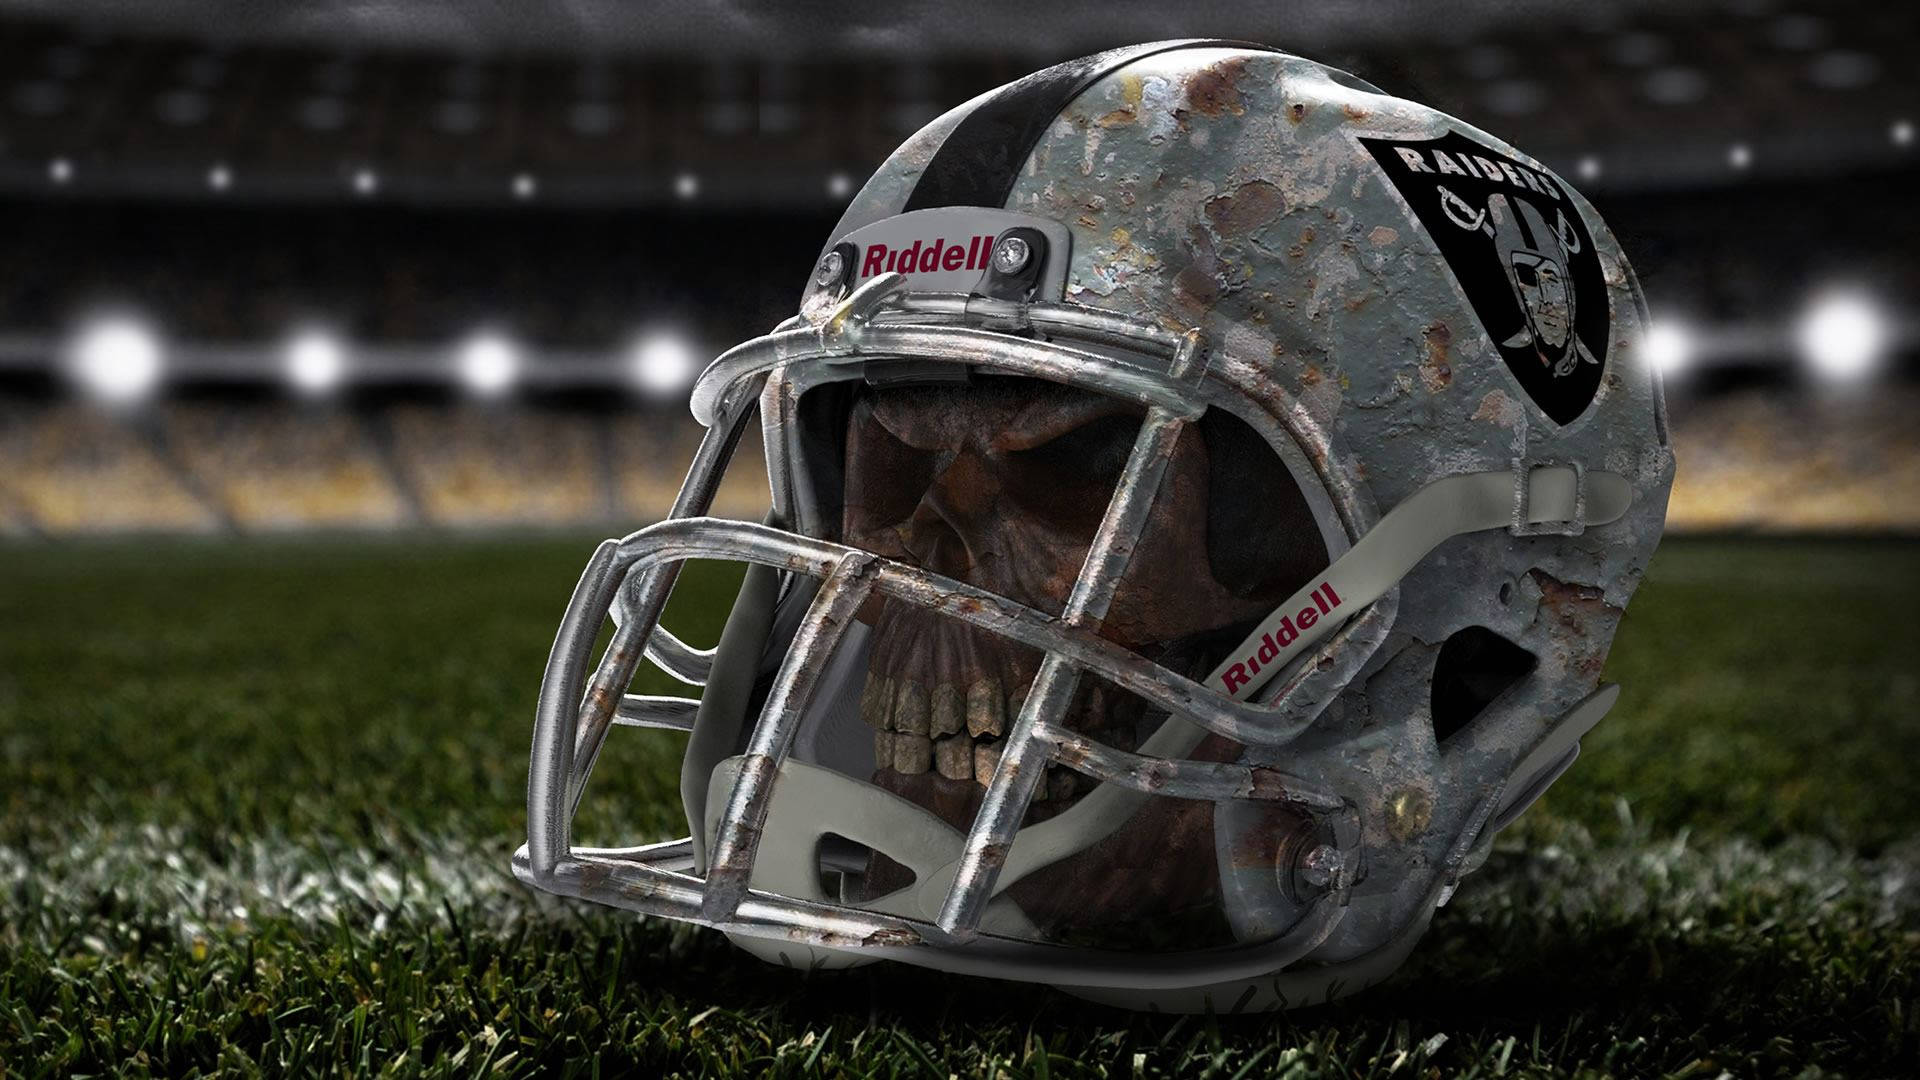 Raiders 1920X1080 Wallpaper and Background Image